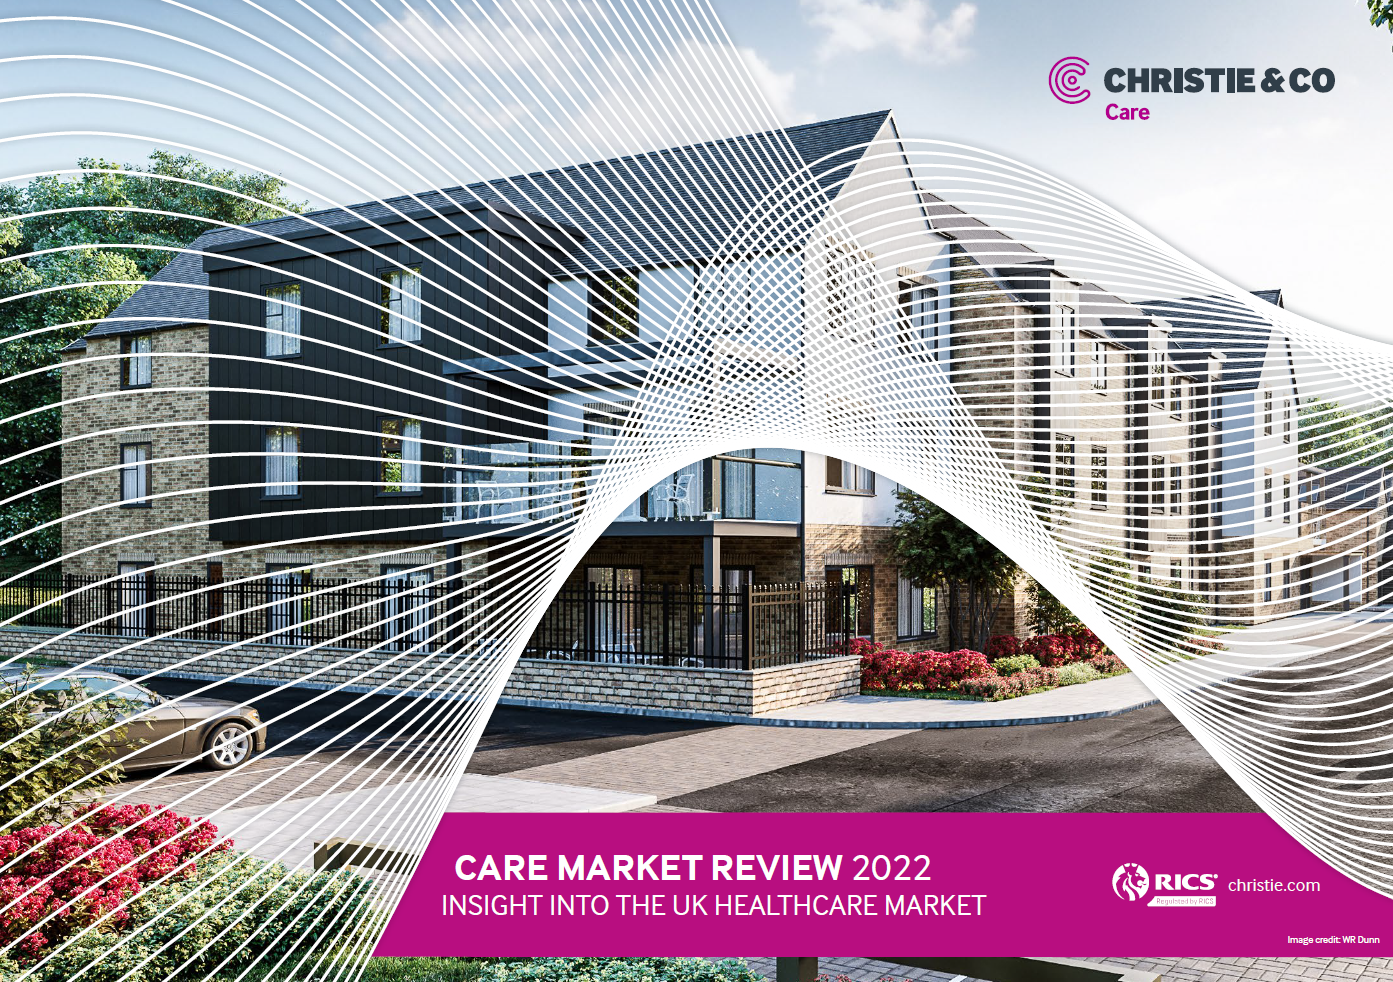 Christie & Co's Care Market Review 2022 report